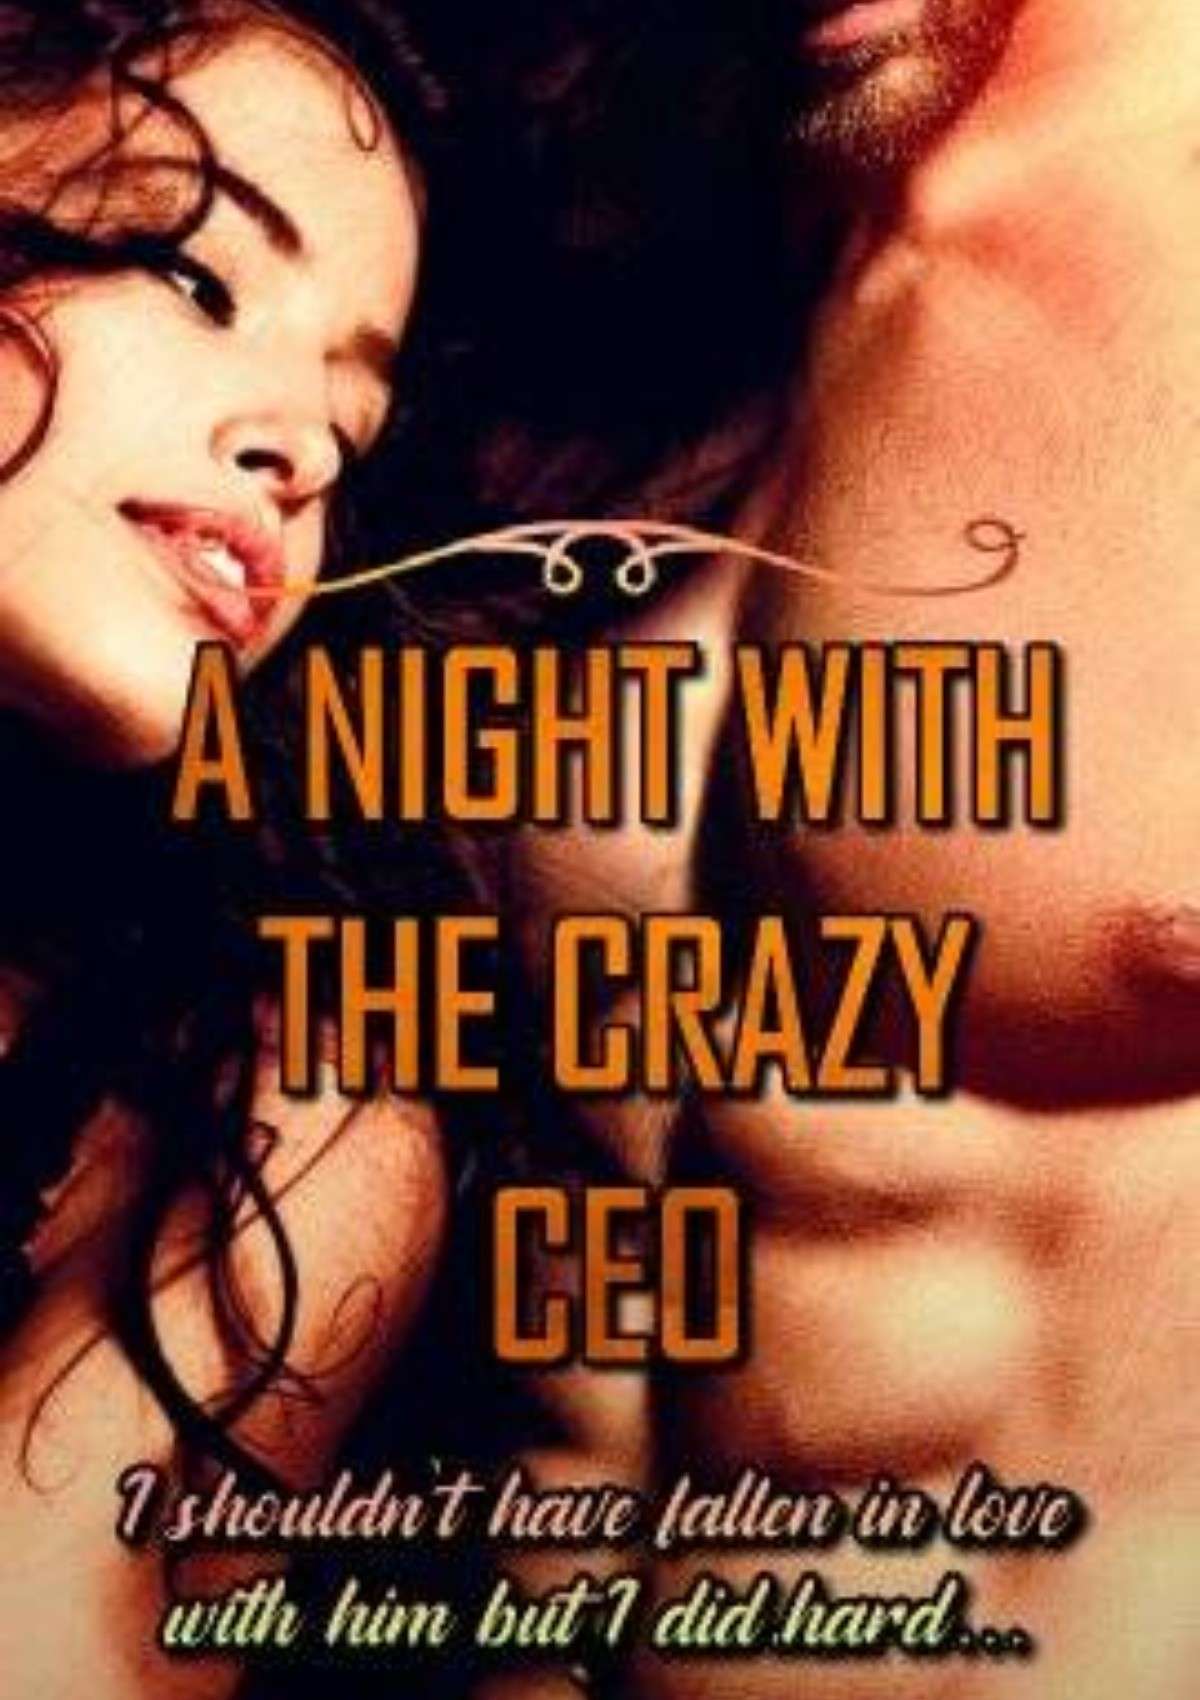 A NIGHT WITH THE CRAZY CEO